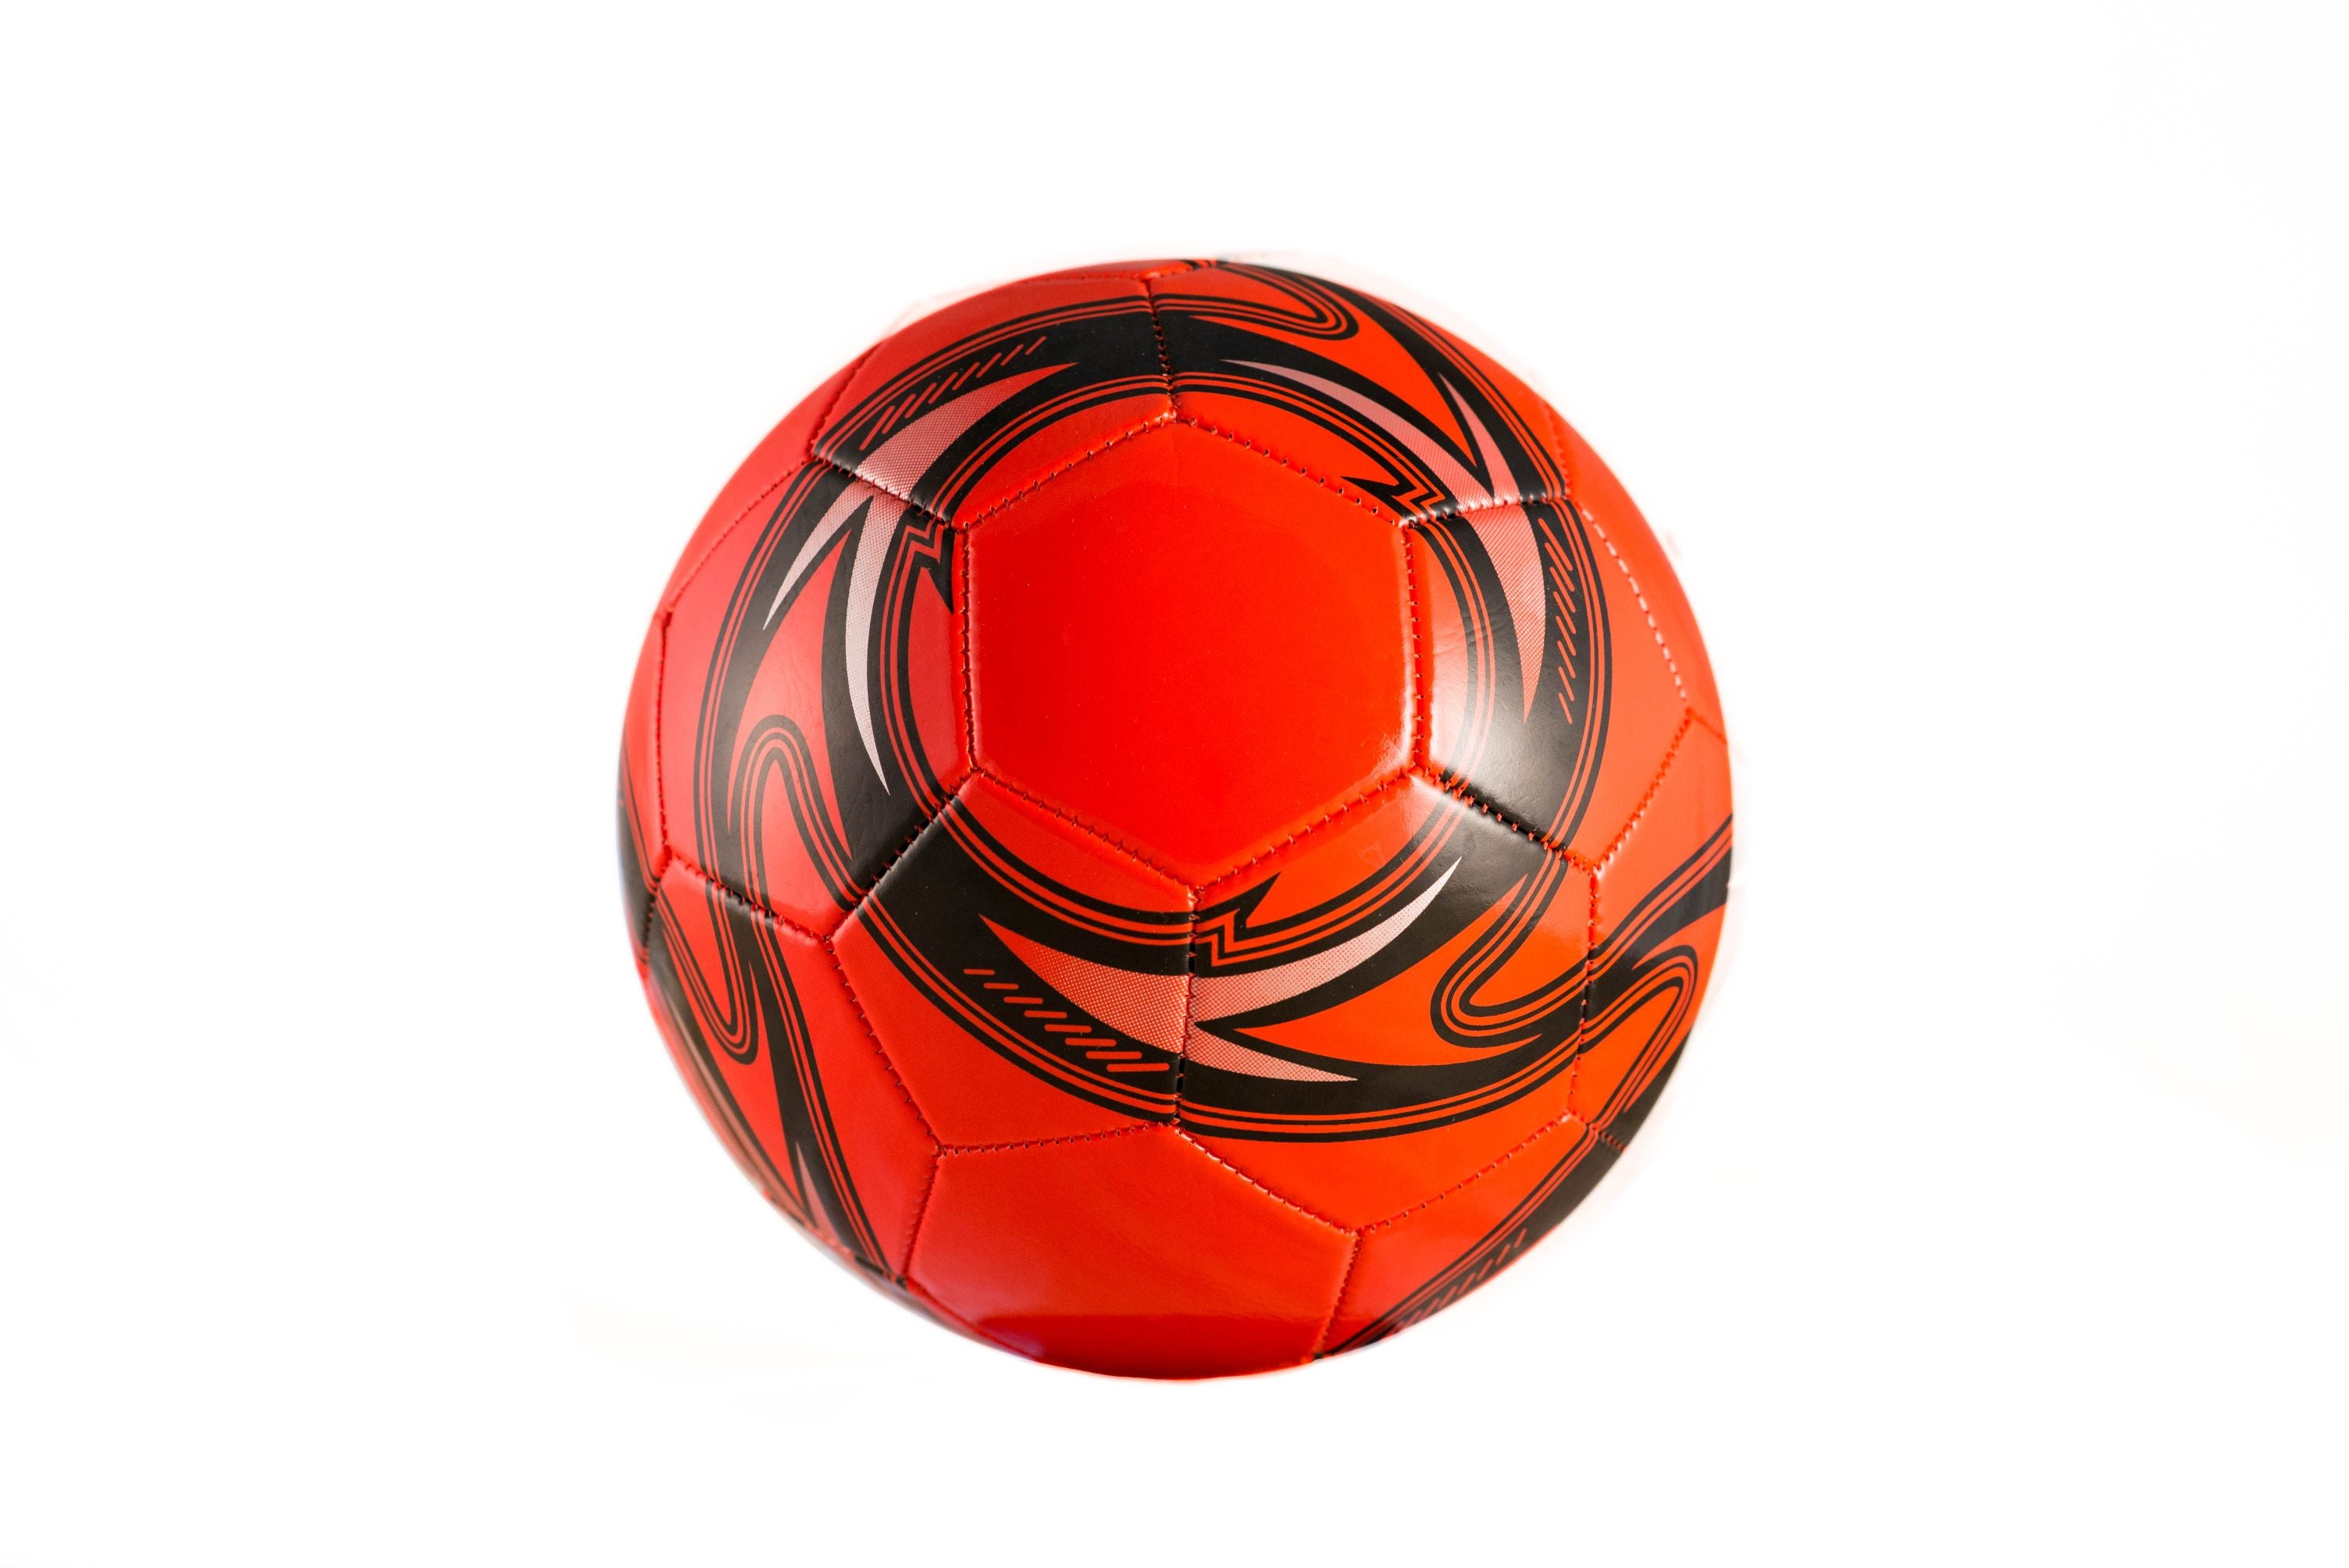 Western Star Official Size and Weight Premium Wholesale Match Soccer Ball Assorted